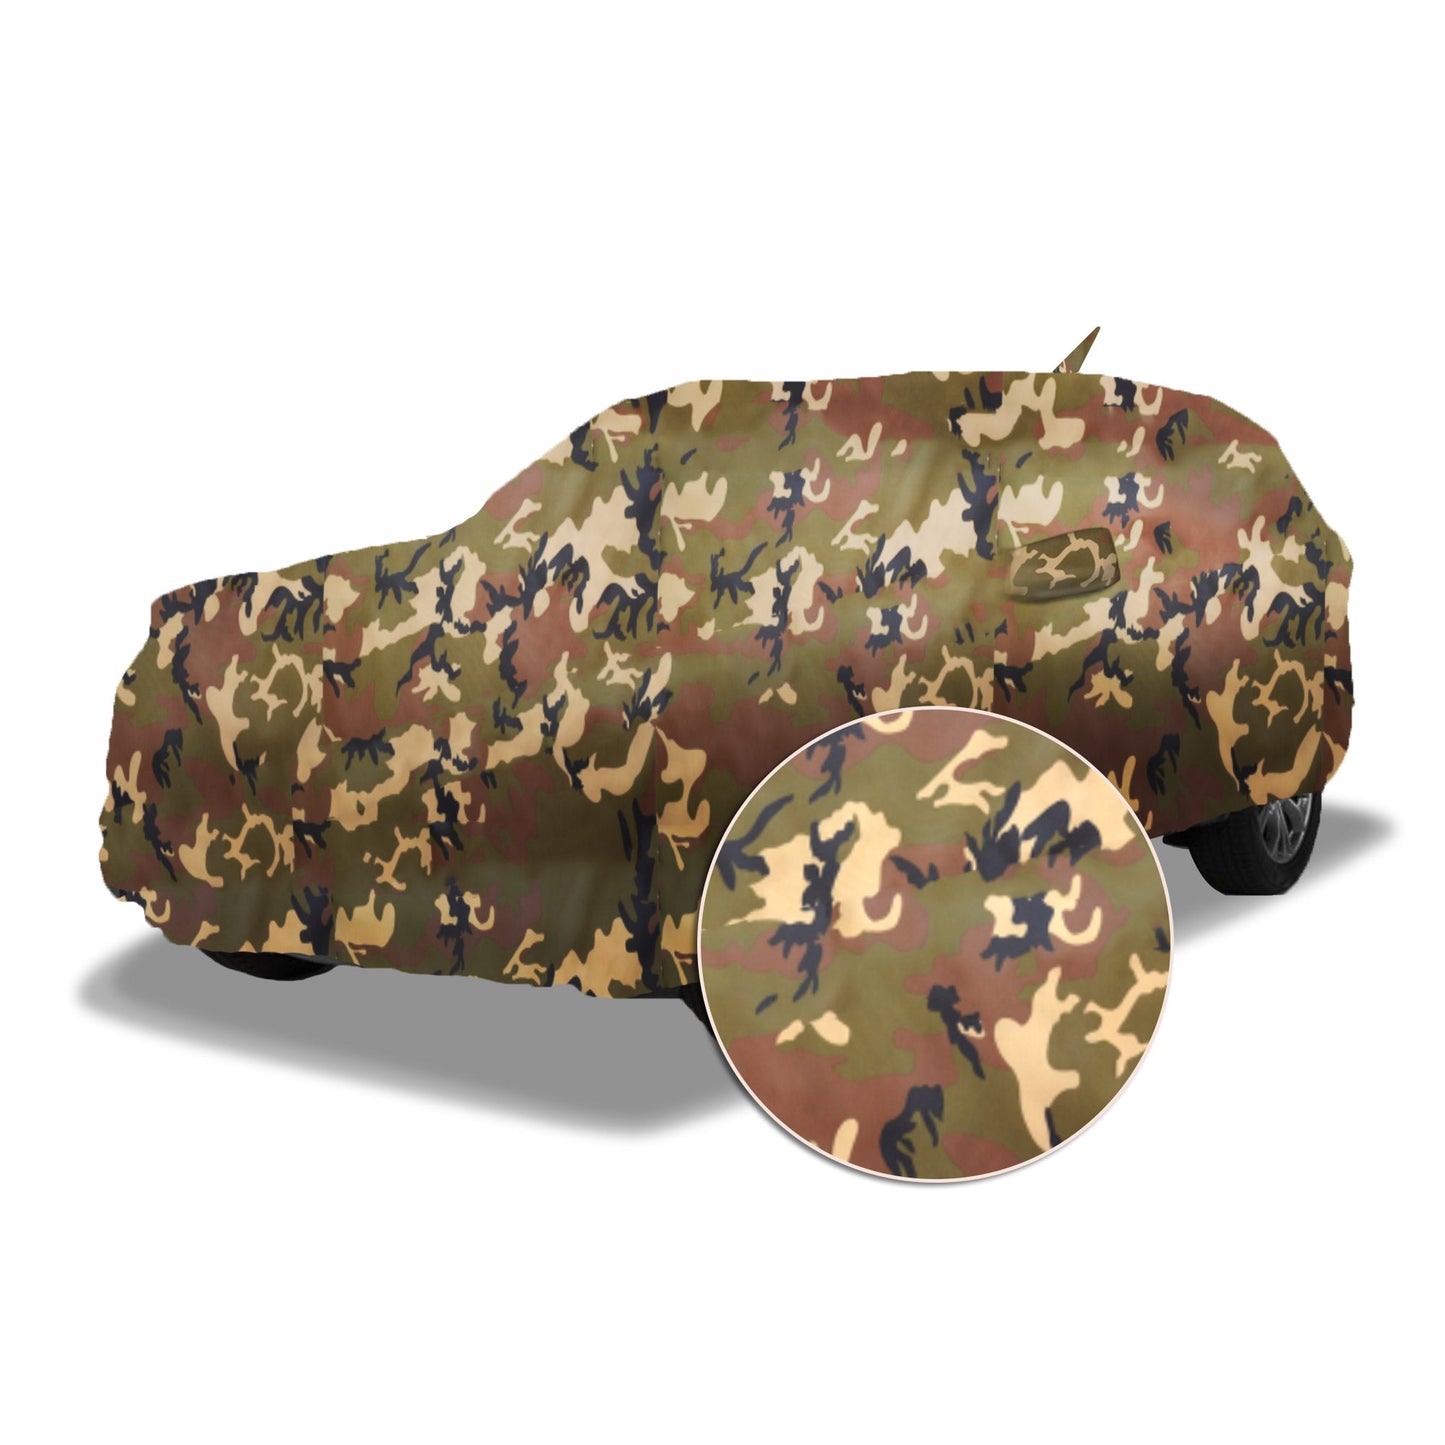 Ascot Mahindra Scorpio Car Body Cover Extra Strong & Dust Proof Jungle Military Car Cover with UV Proof & Water-Resistant Coating